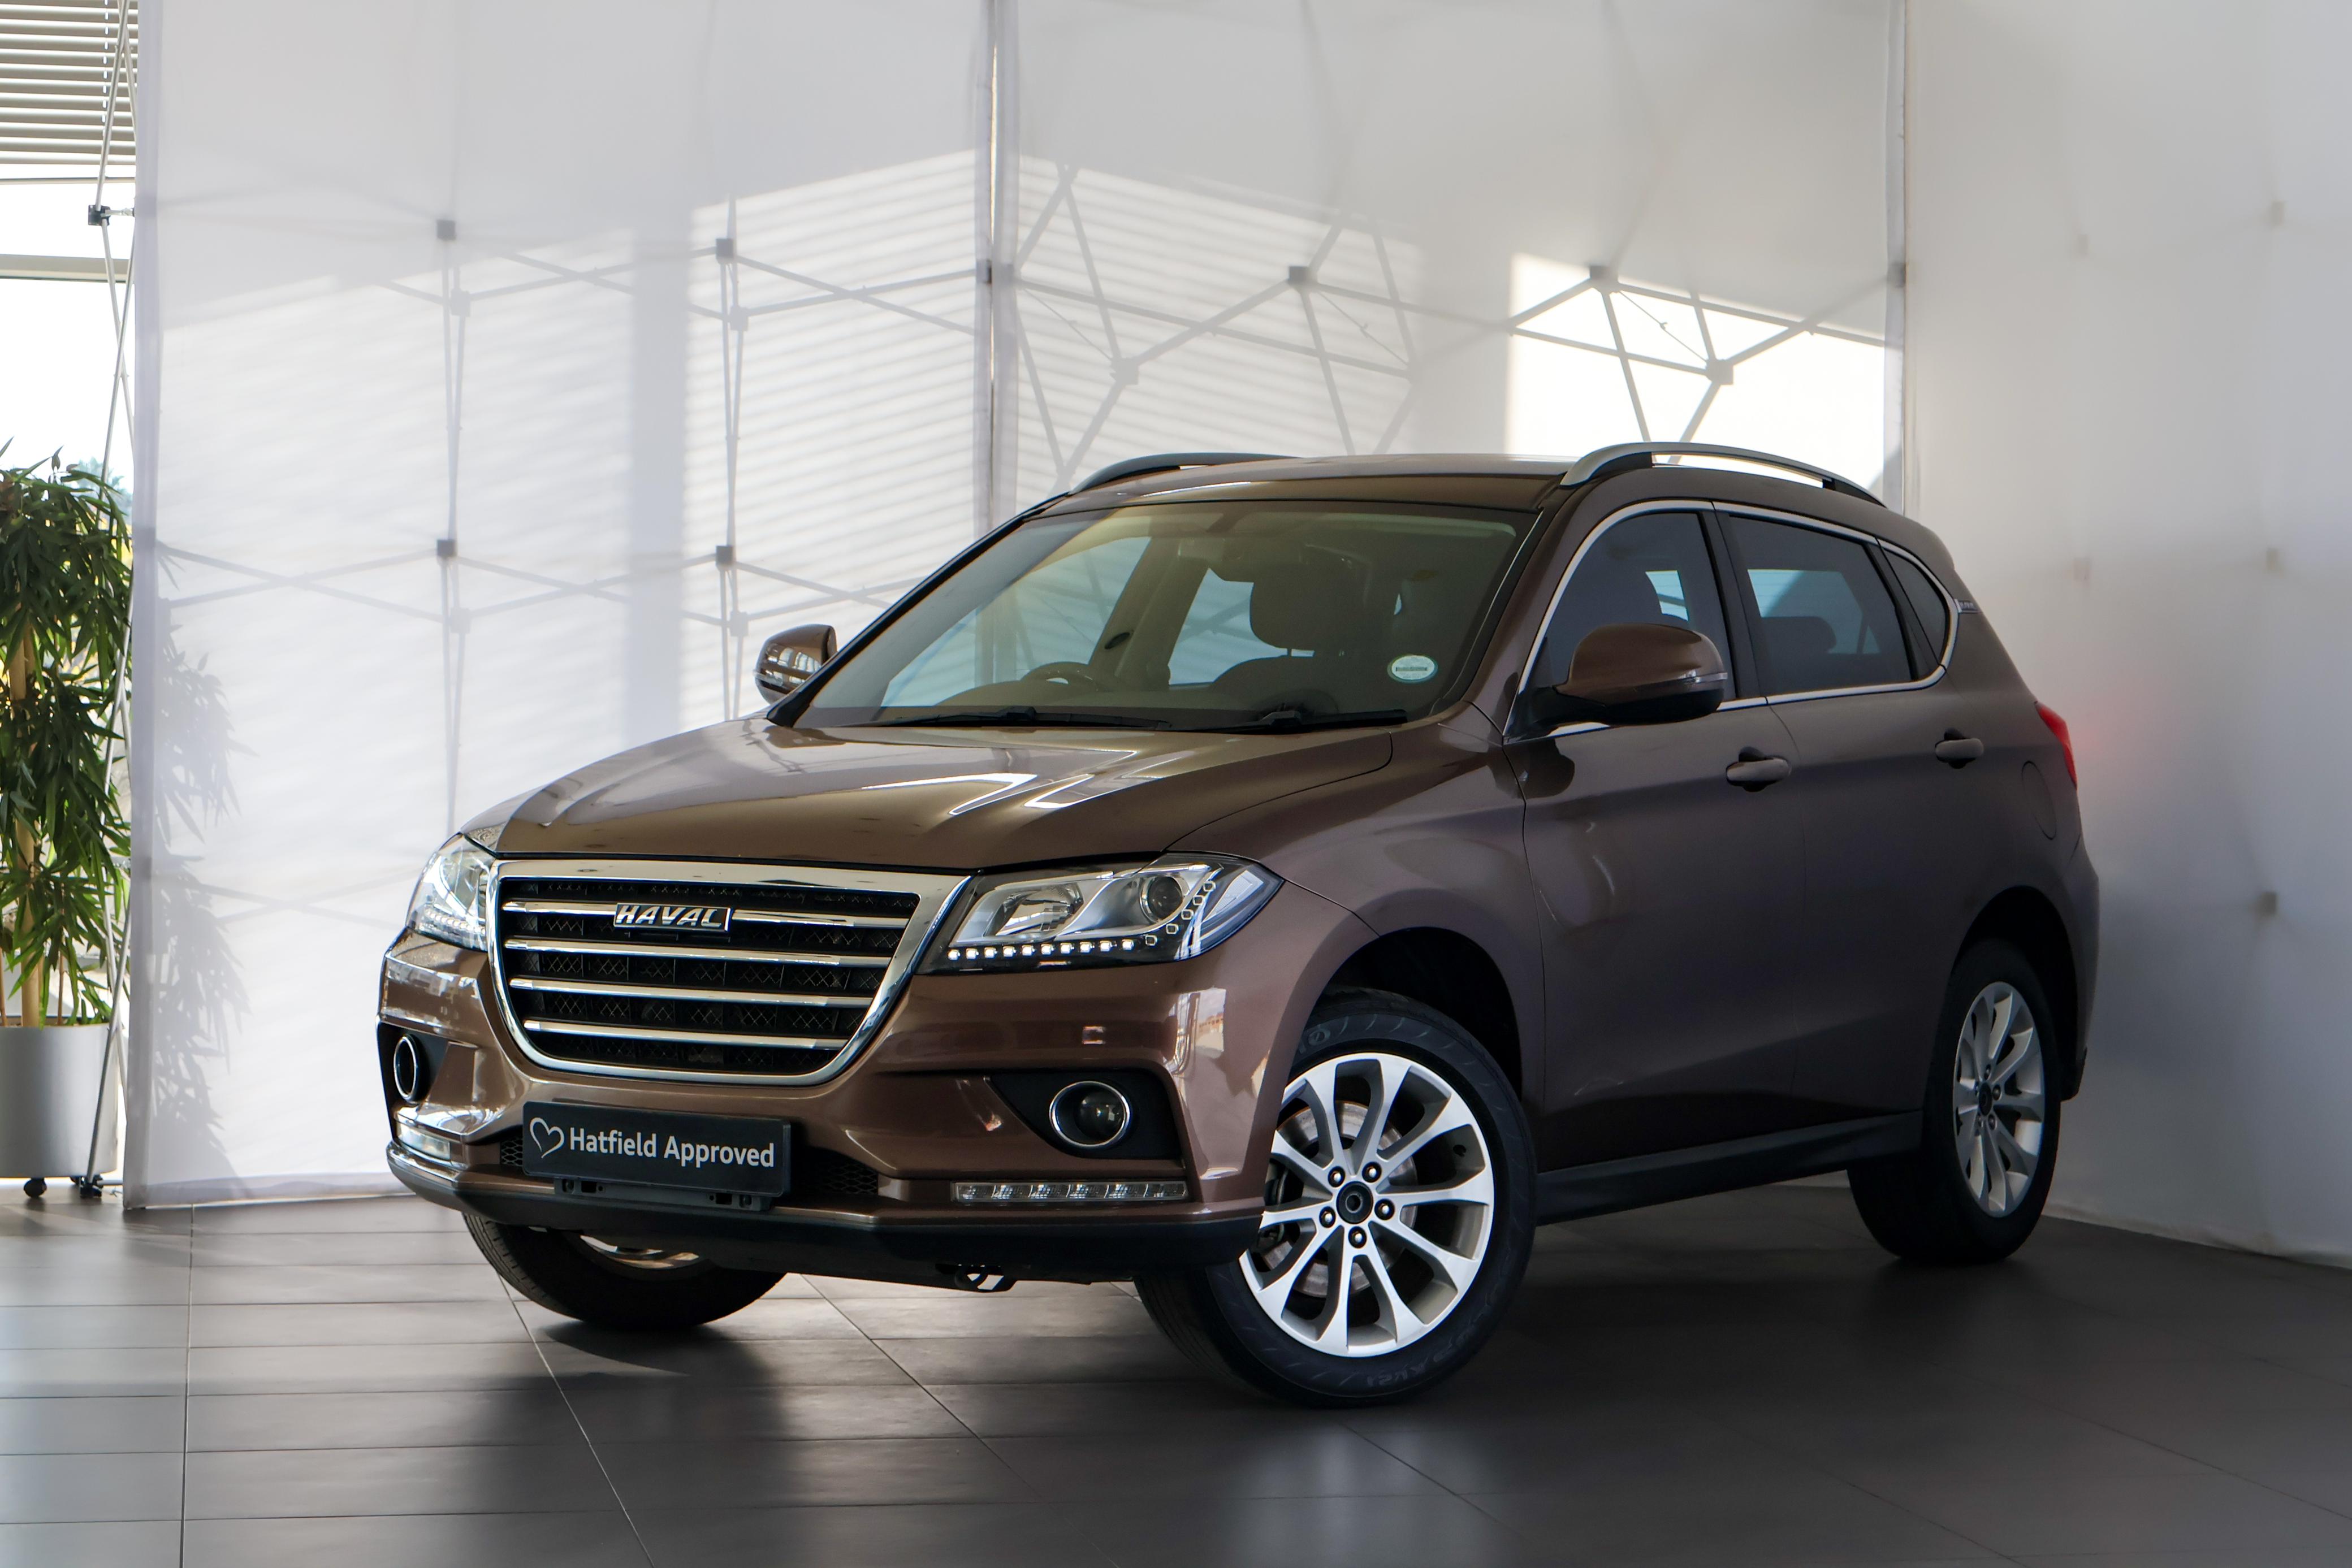 2019 Haval H2  for sale - 7753191